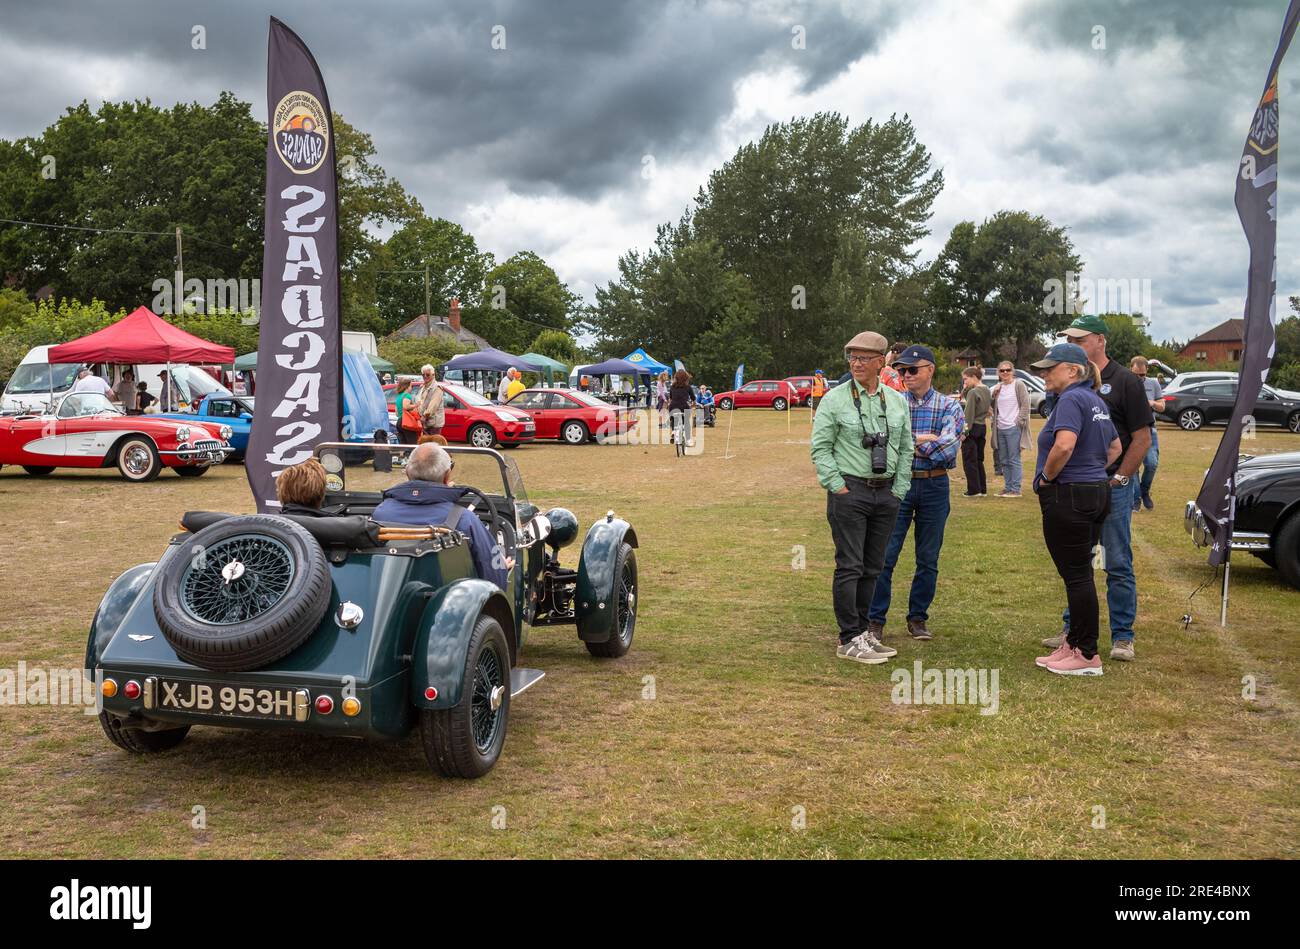 Car enthusiasts watch a  participant drive his 2-seater dark green NG TD kit car (XJB 953H) from a classic car show in Storrington, West Sussex, UK. Stock Photo